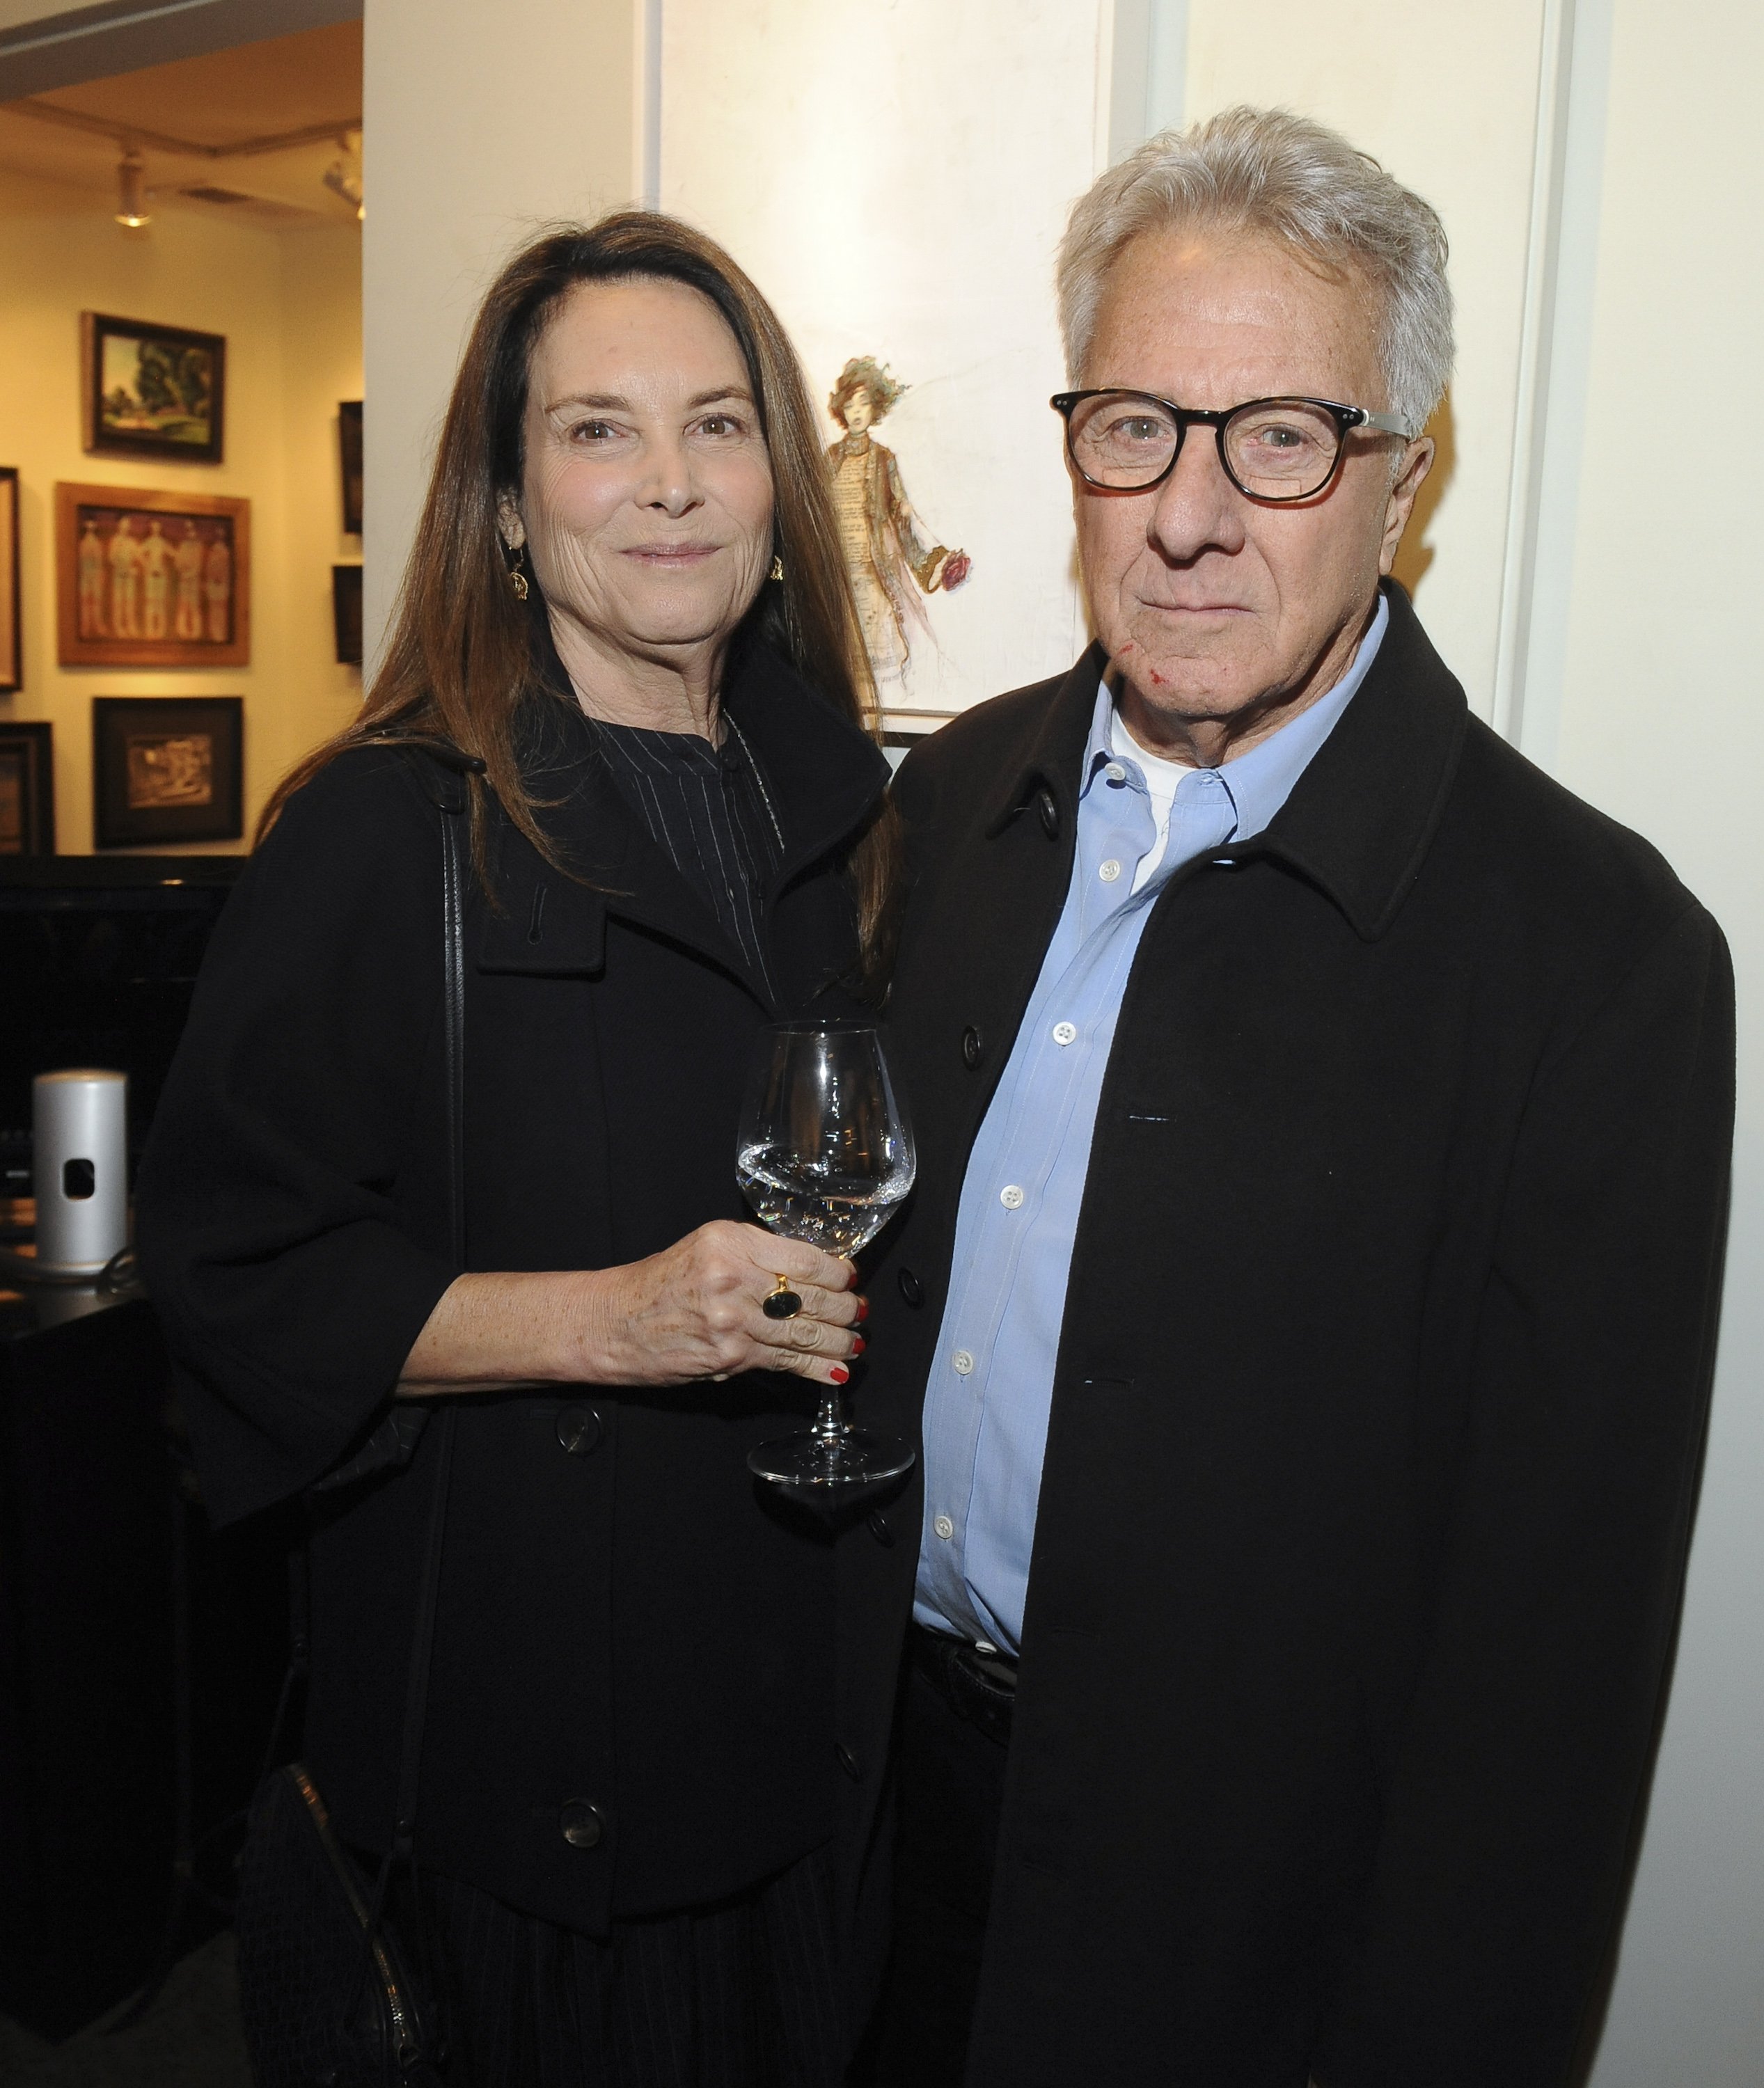 Lisa Hoffman and Dustin Hoffman attend the Trigg Ison Fine Art In Association With Krista Smith And Sam Taylor-Johnson Present Darren Legallo "From Destruction" event on January 10, 2020 in West Hollywood, California. | Source: Getty Images 